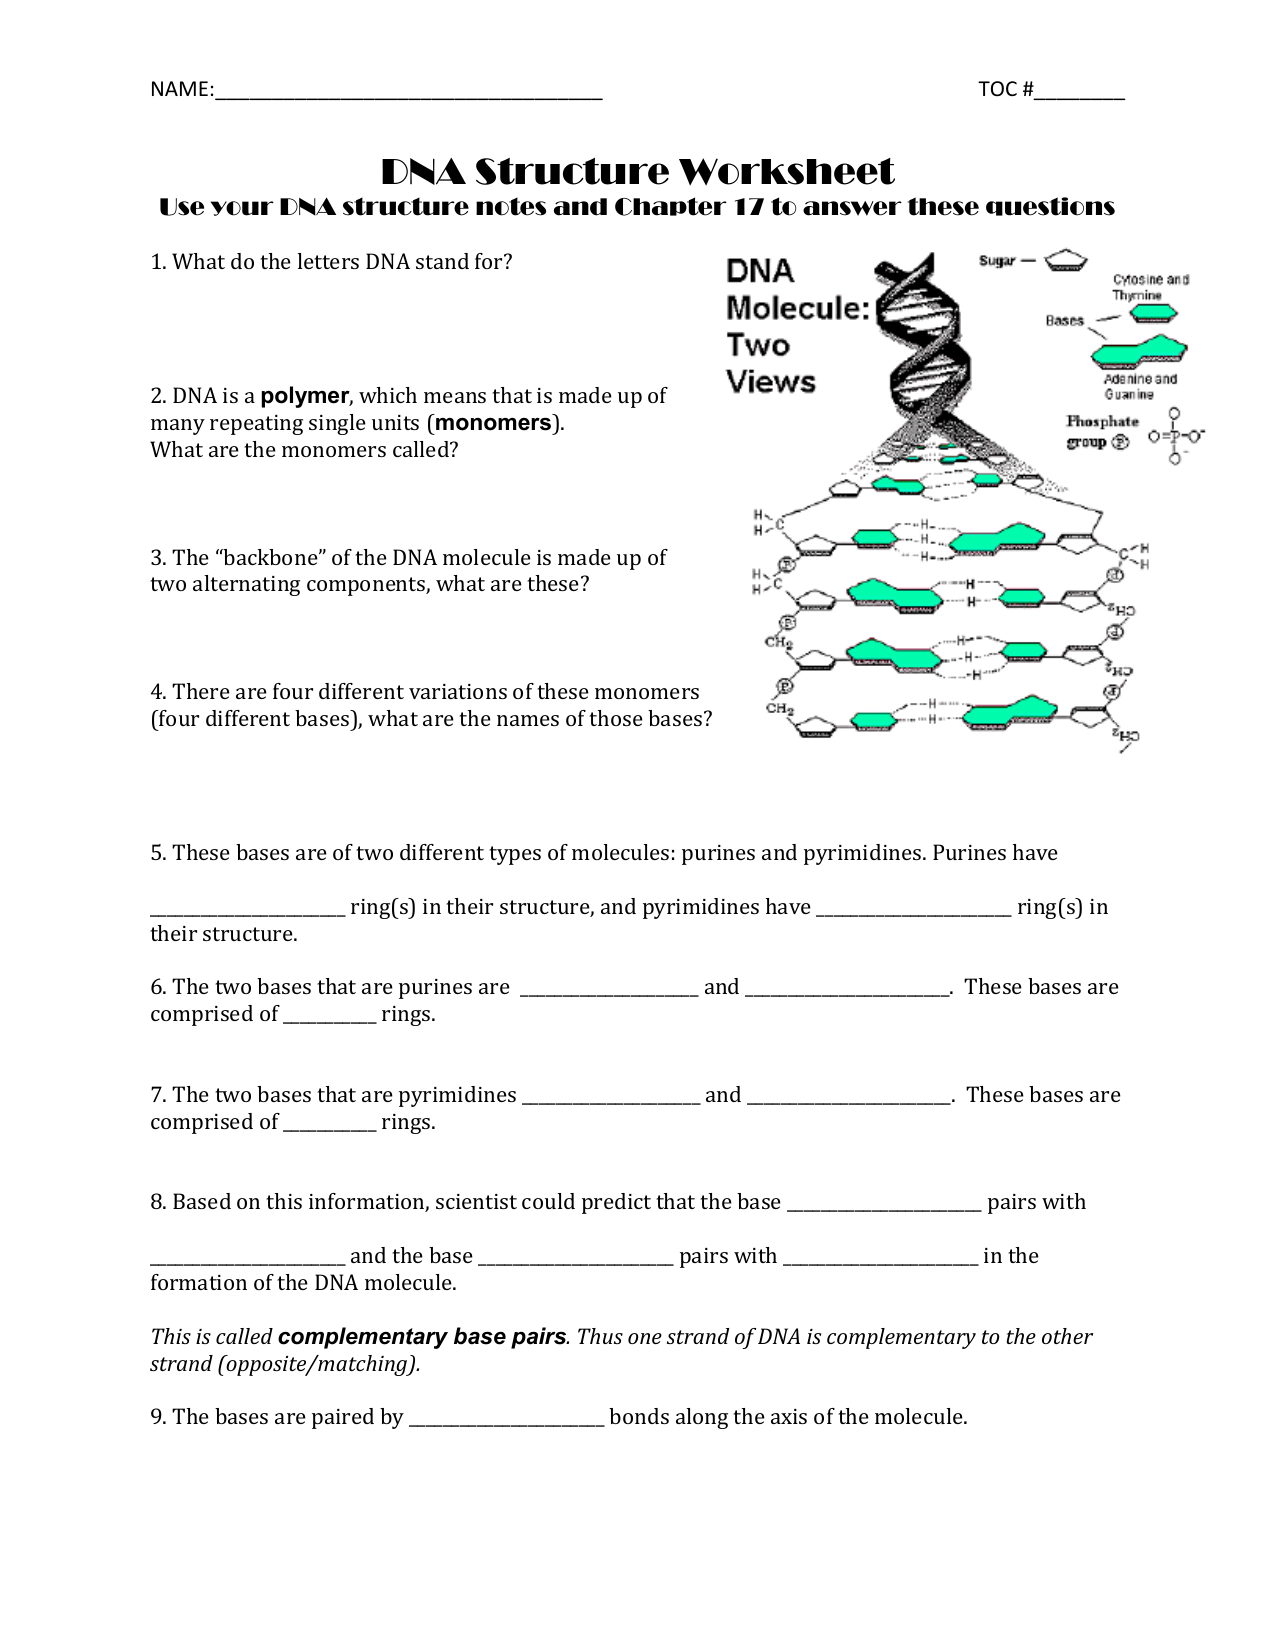 DNA Structure Worksheet Throughout Nucleic Acids Worksheet Answers